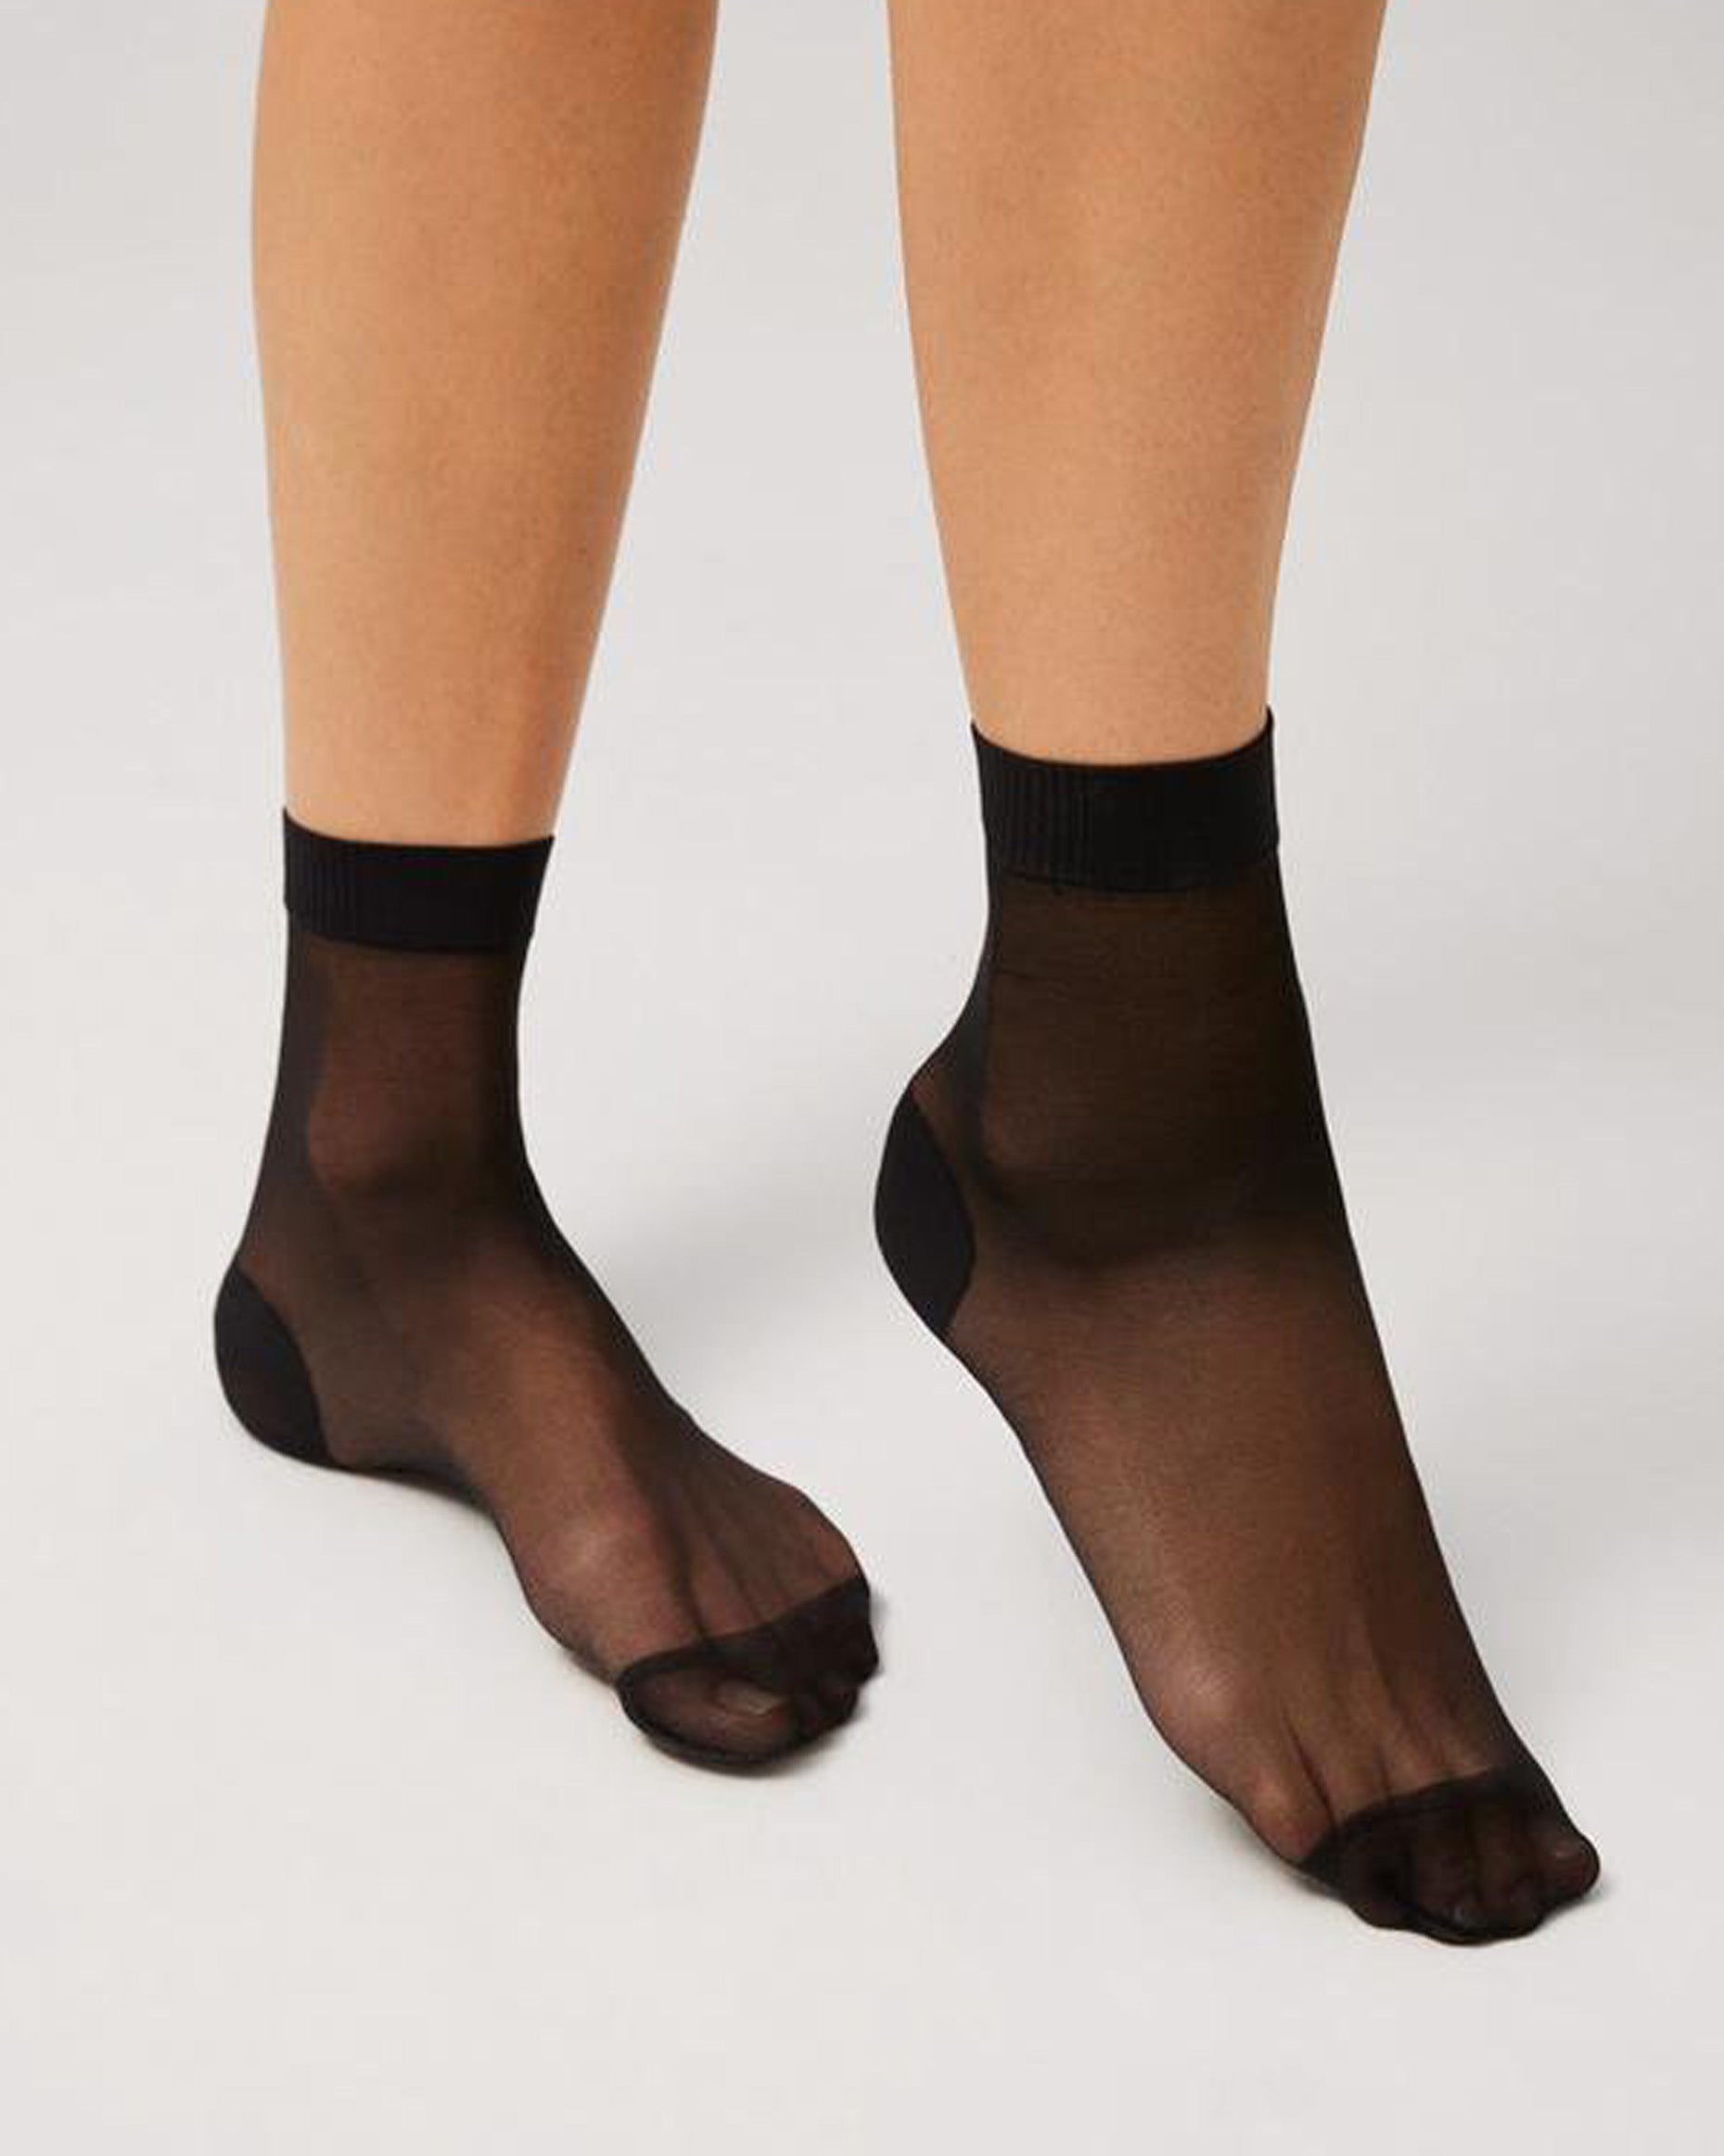 Ysabel Mora 18114 Sheer Reinforced Ankle Socks - Sheer black ankle sock with an opaque reinforced toe and heel and soft ribbed anti-pressure comfort cuff.